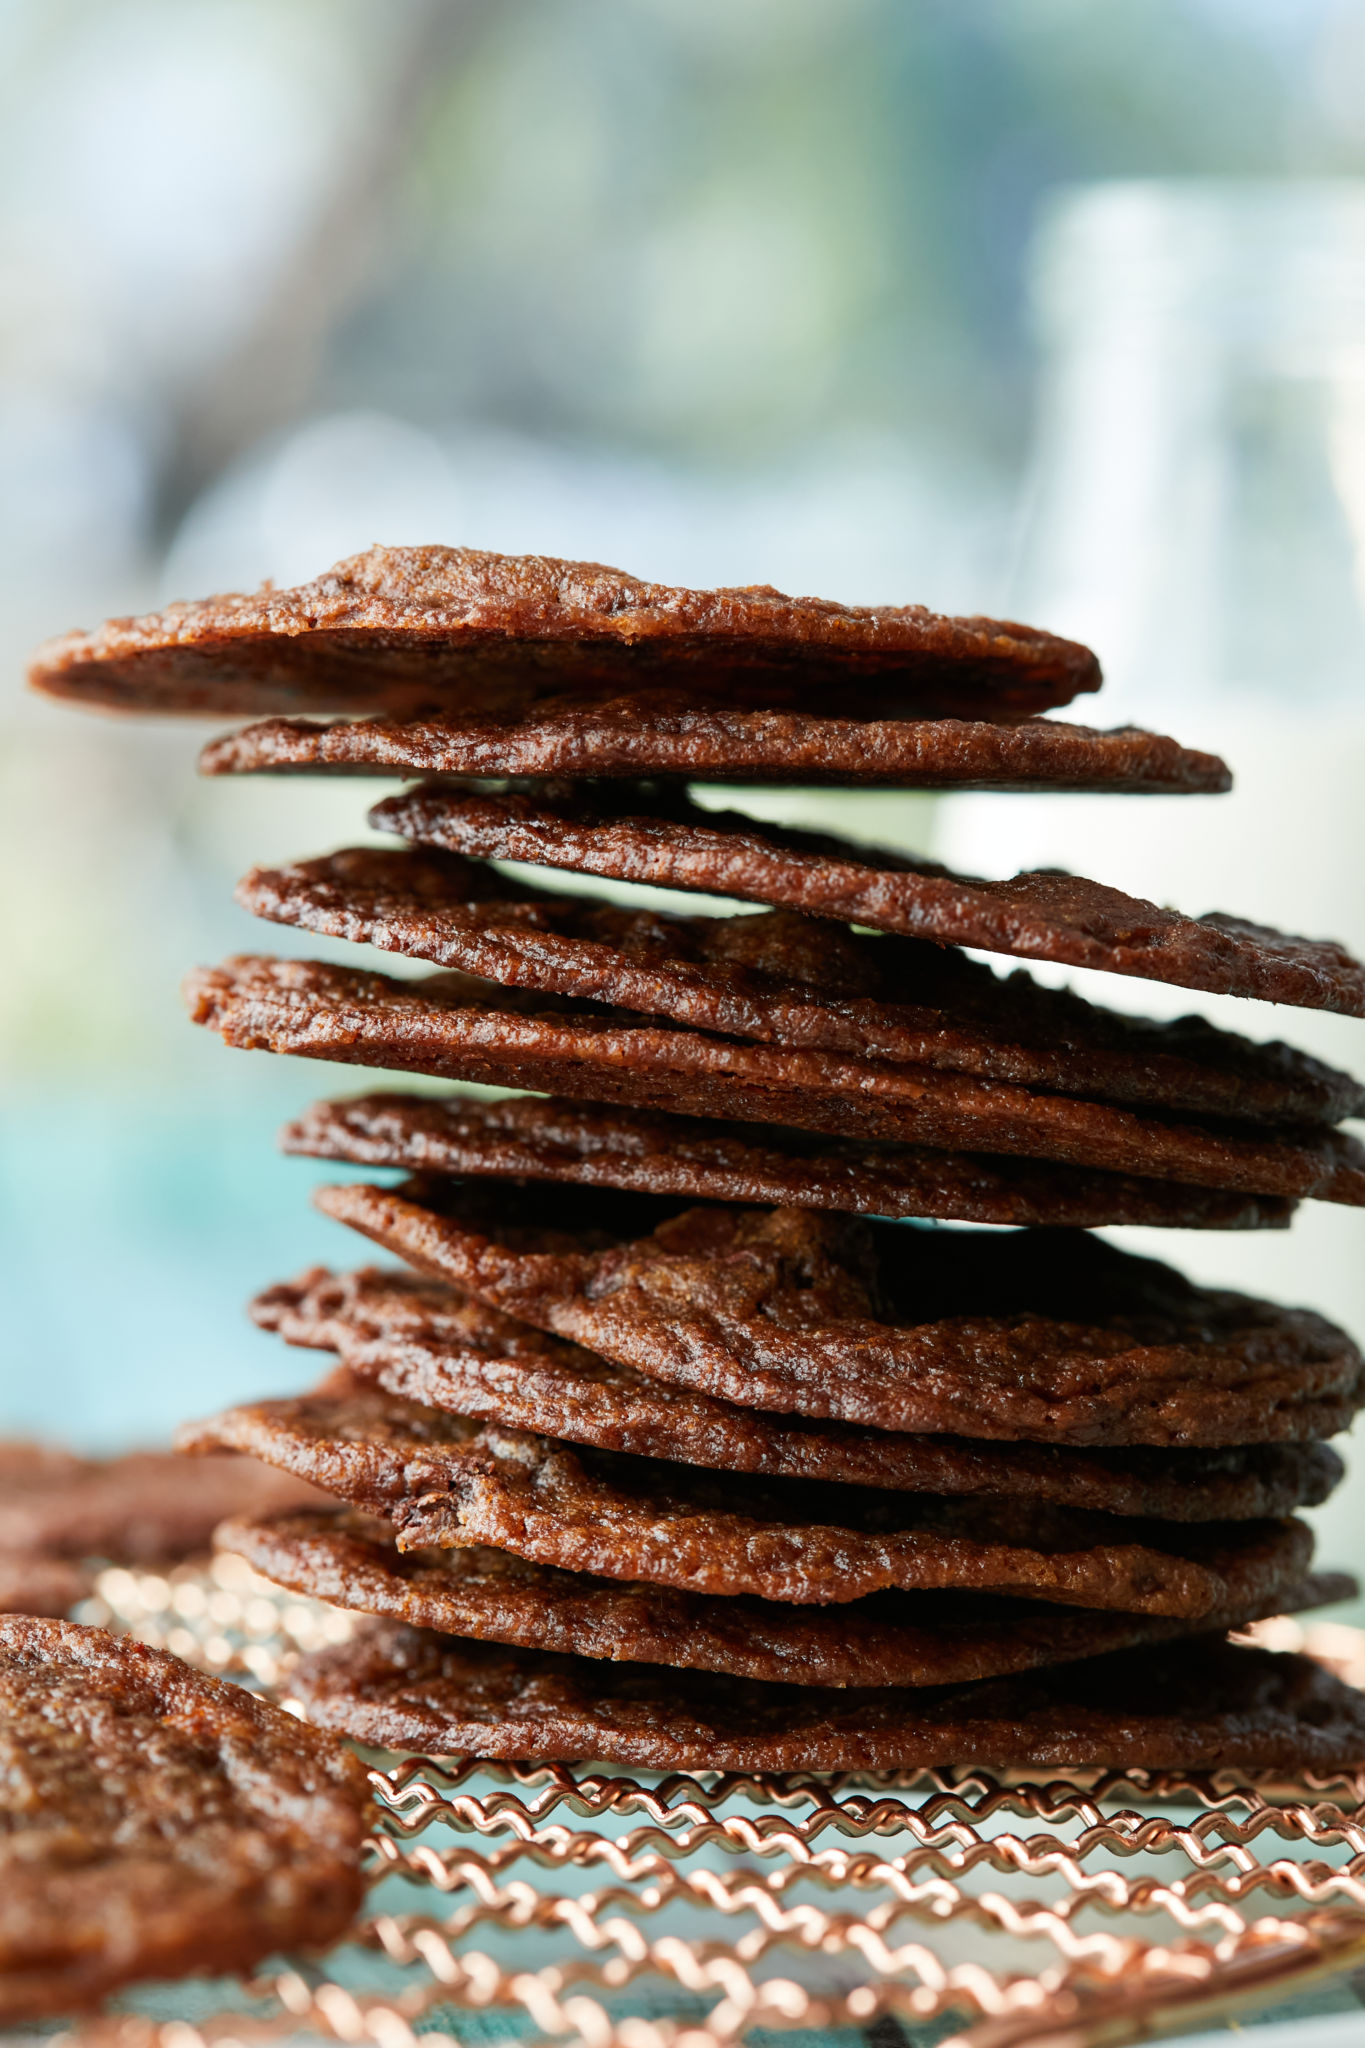 My crispy chocolate chip cookies recipe can be stacked high like this.